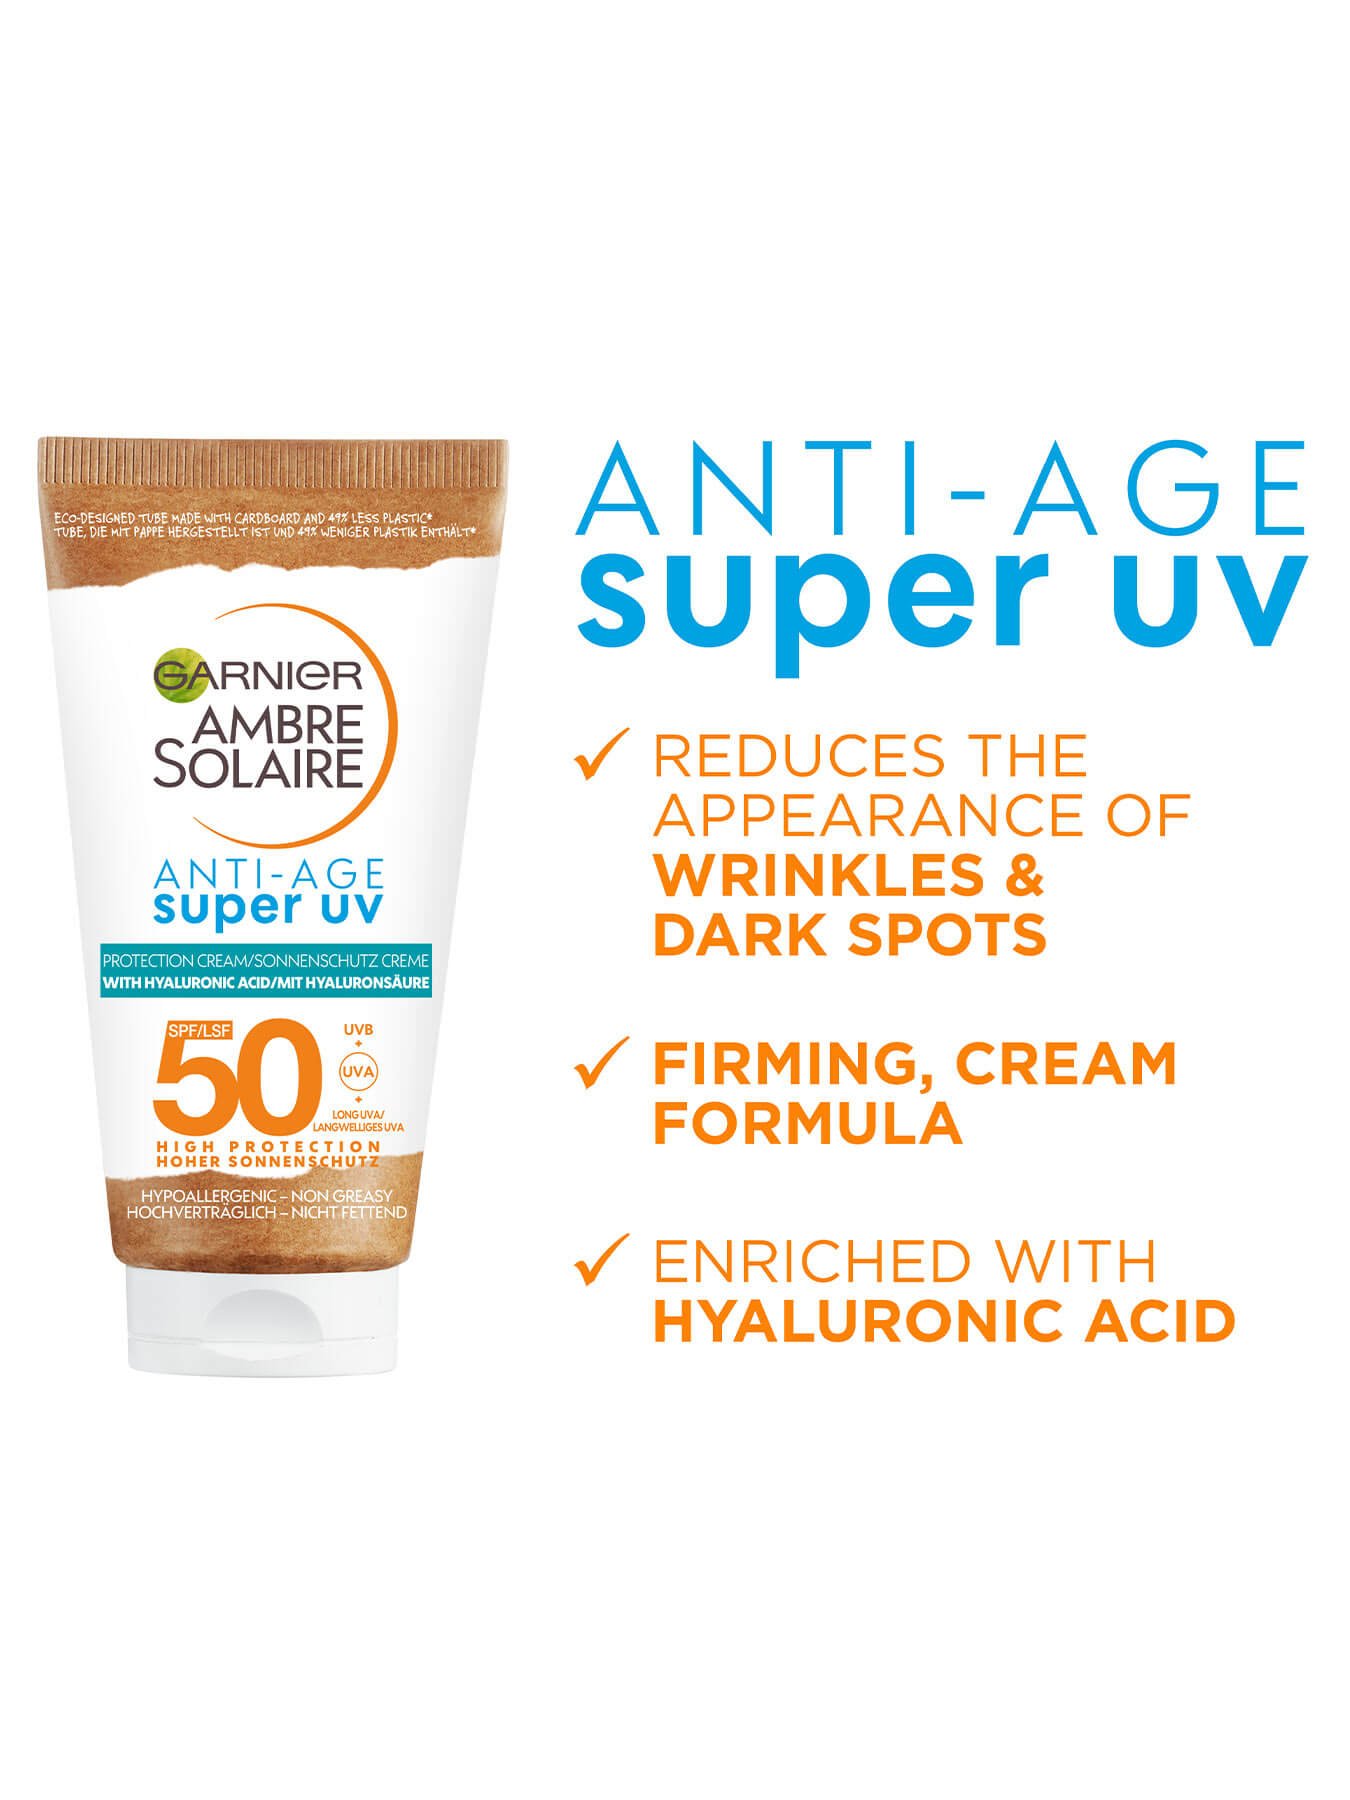 Ambre Solaire Super UV Anti Age Packshot and list of benefits